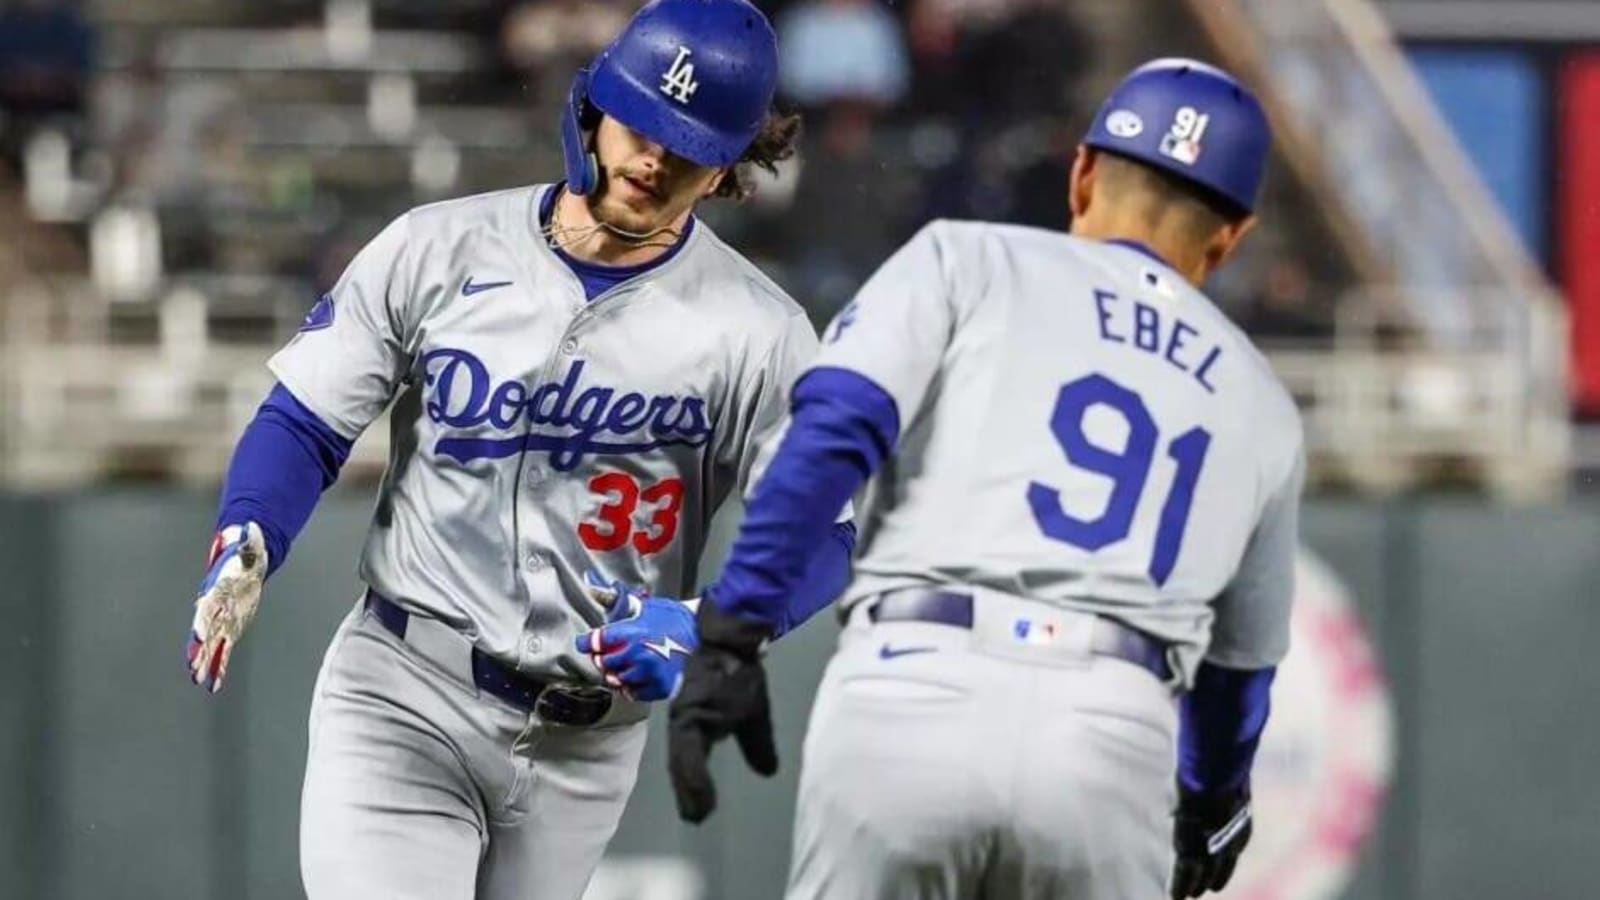 James Outman: It’s Too Early In Dodgers Season ‘To be Super Frustrated’